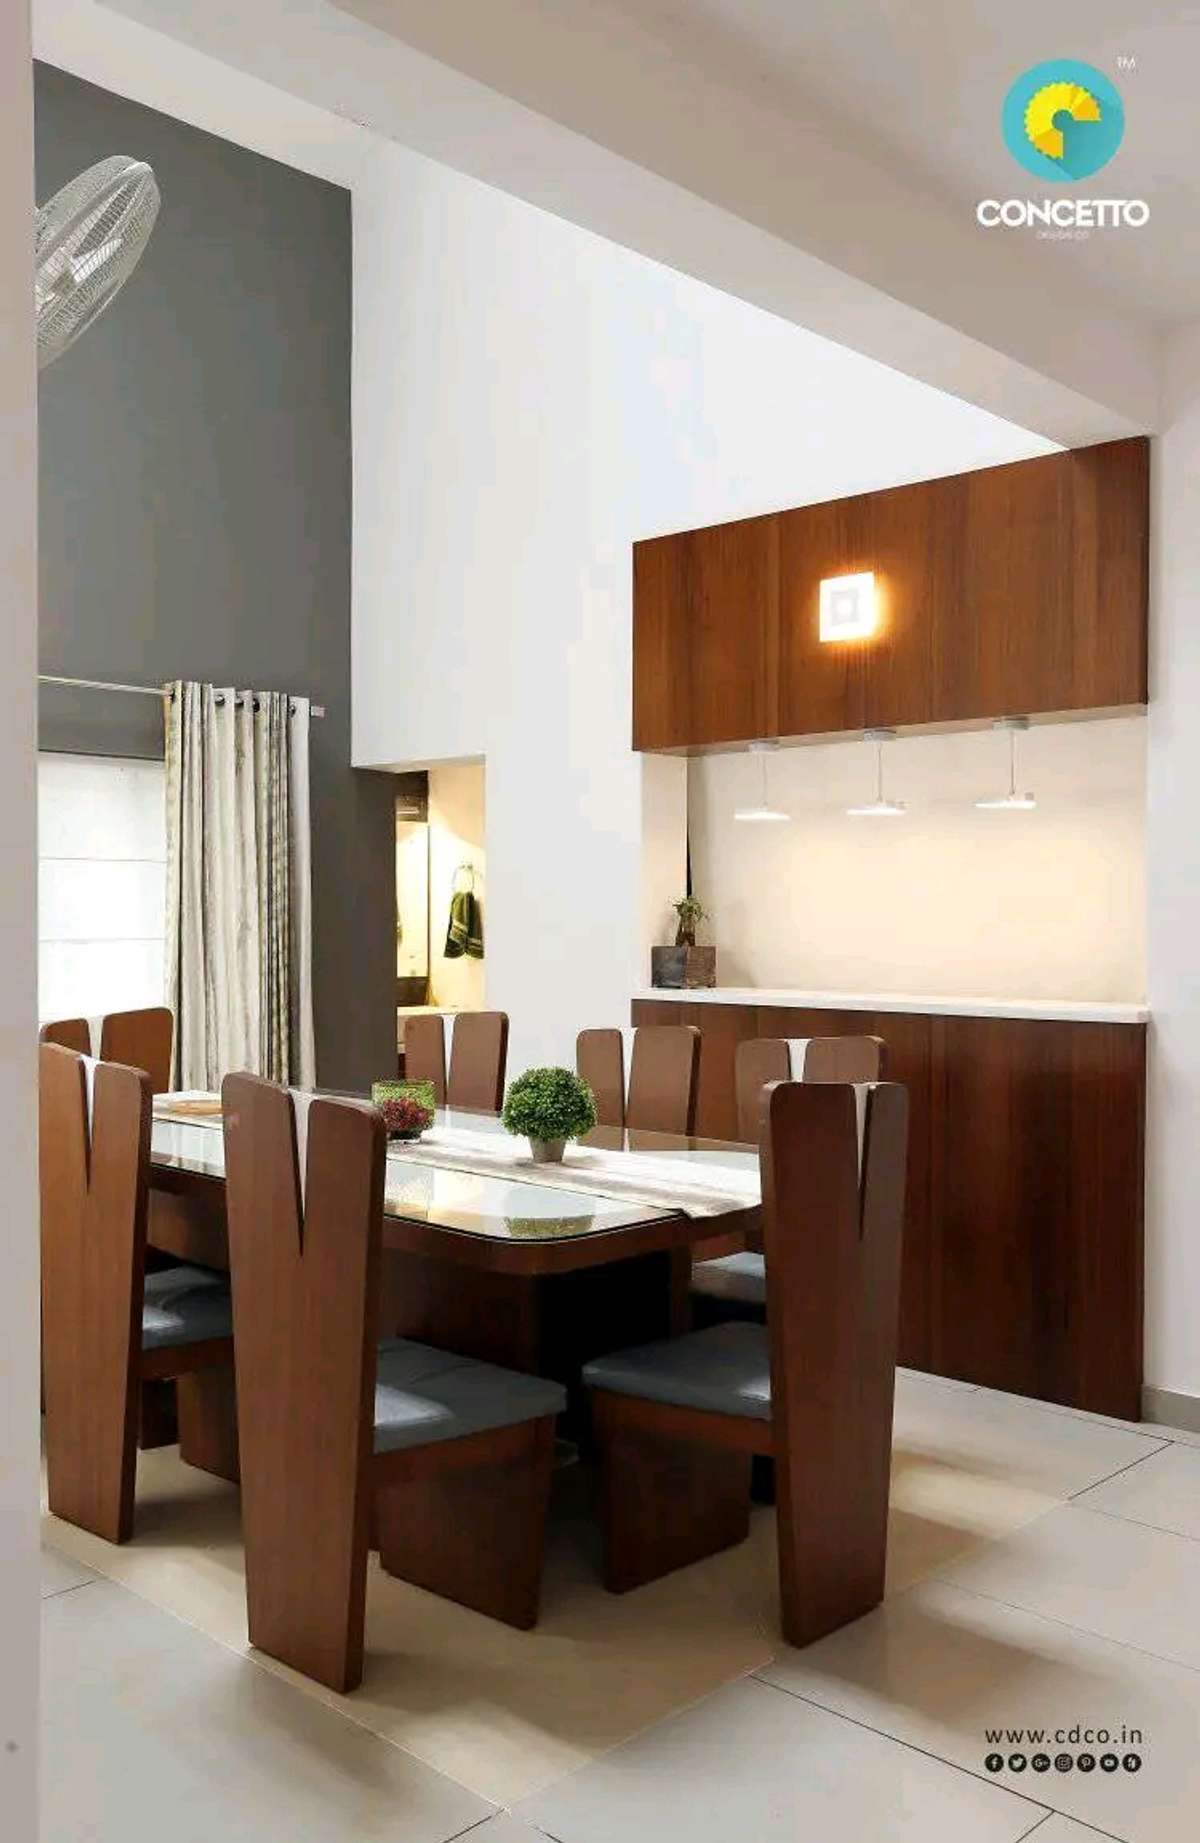 Dining, Furniture, Table, Storage Designs by Architect Concetto Design Co, Kozhikode | Kolo